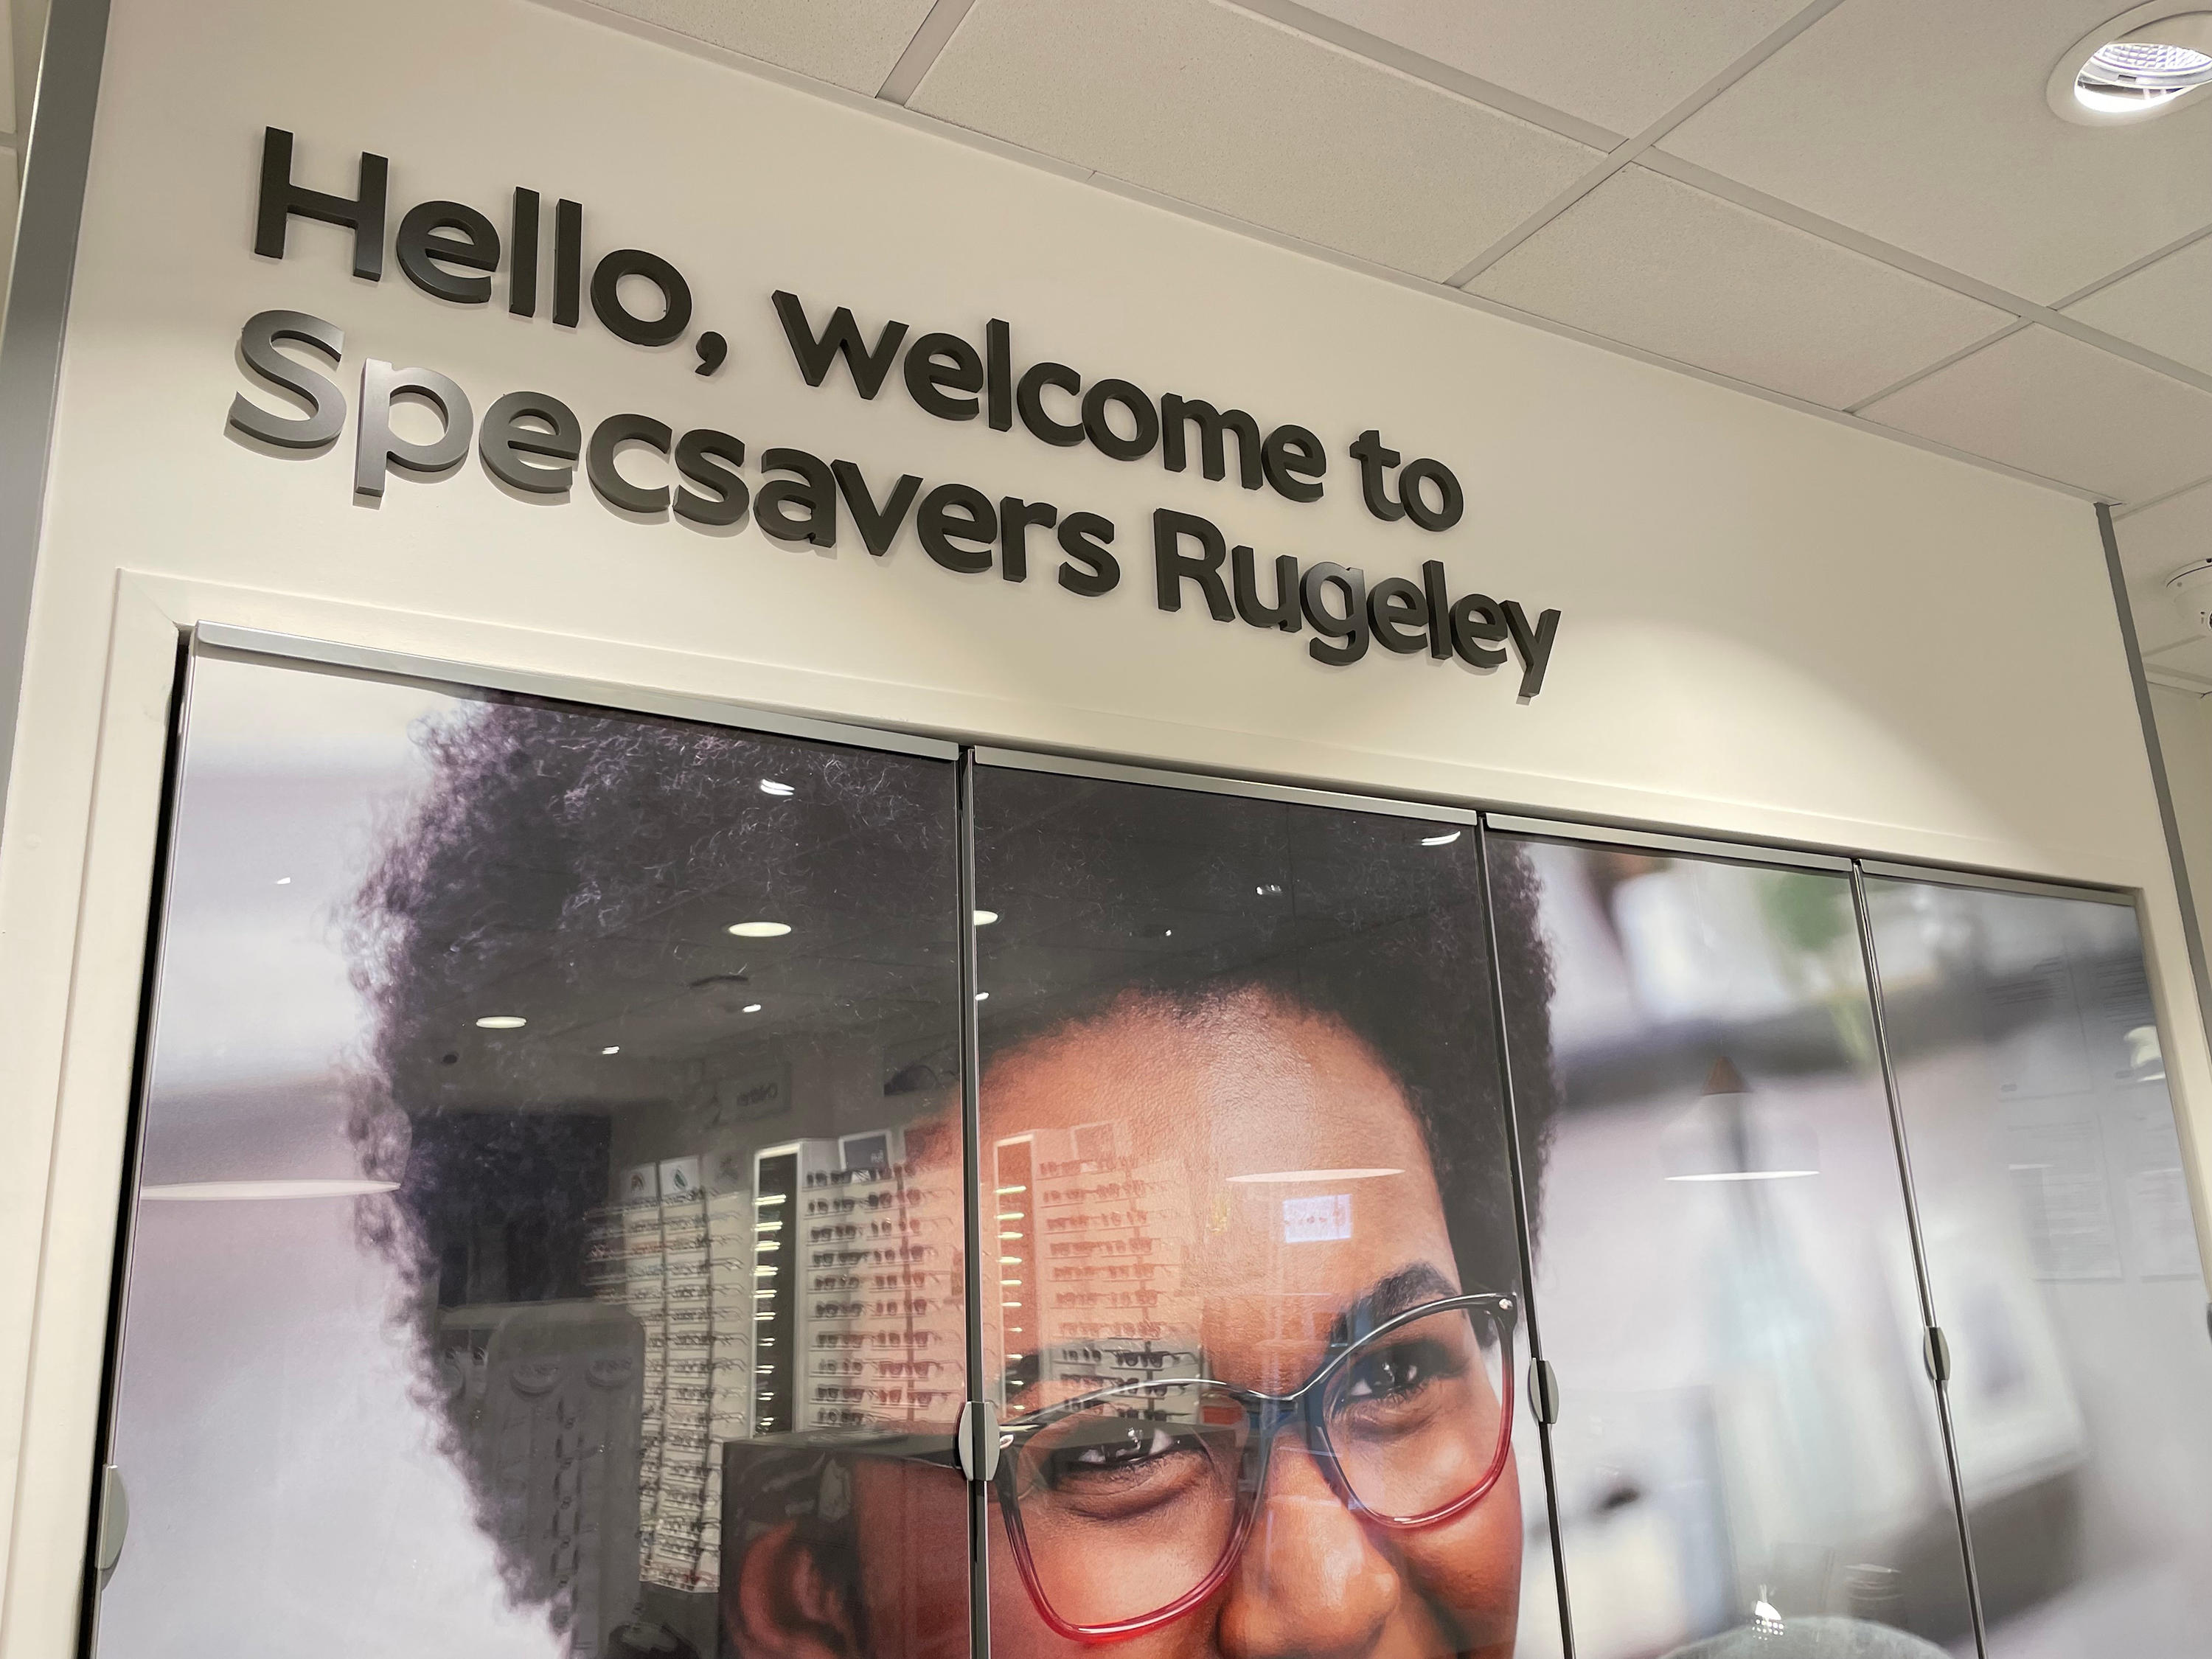 Specsavers Rugeley Specsavers Opticians and Audiologists - Rugeley Rugeley 01889 576060